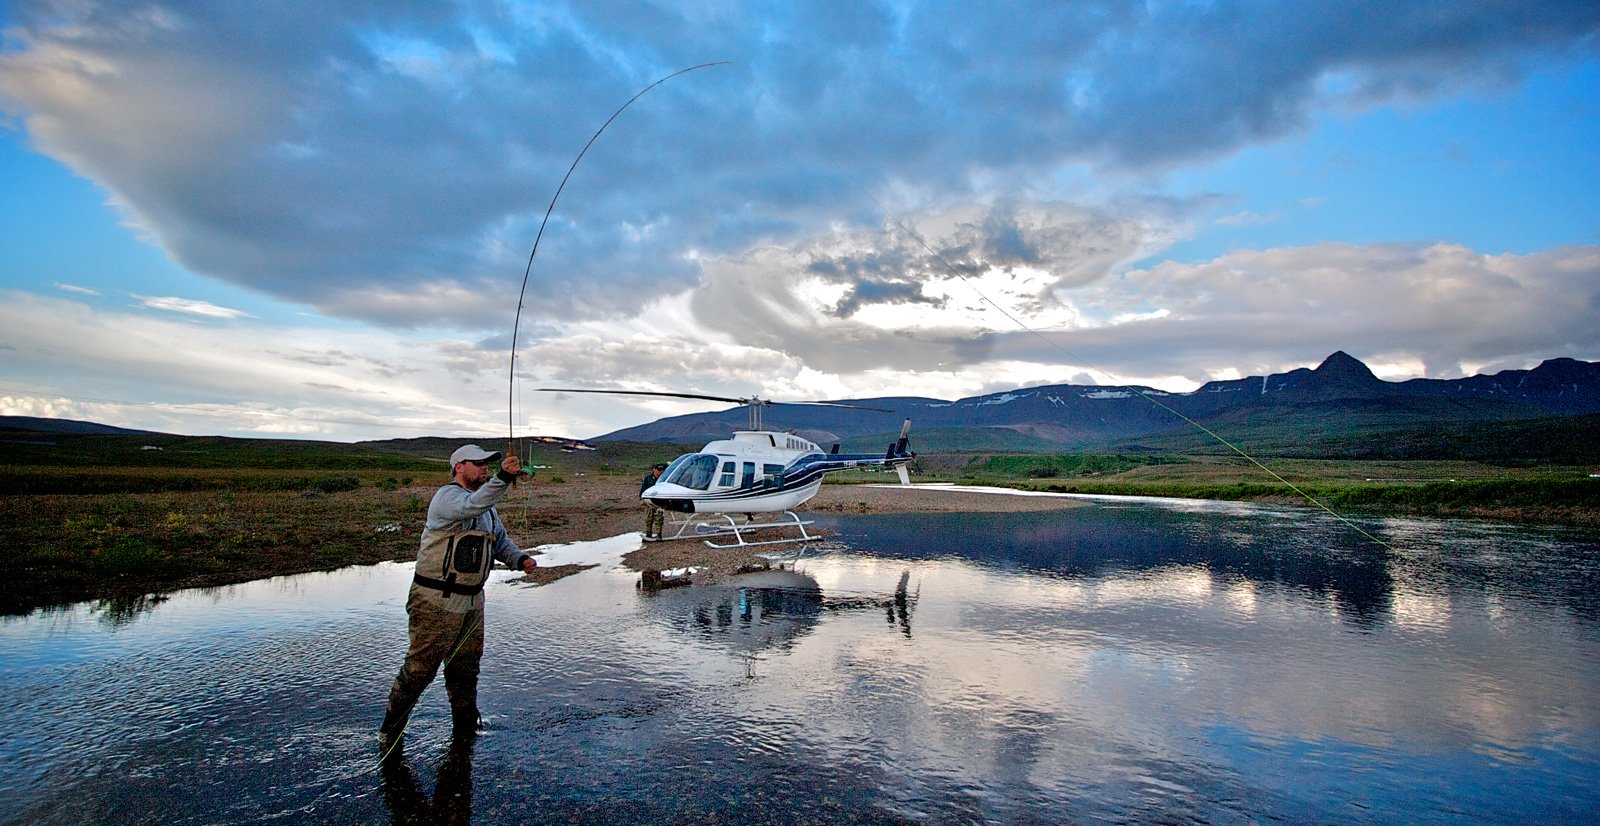 Helicopter Fishing Trip in Iceland. Reykjavik Helicopters Iceland - photo by Jon Gustafsson.